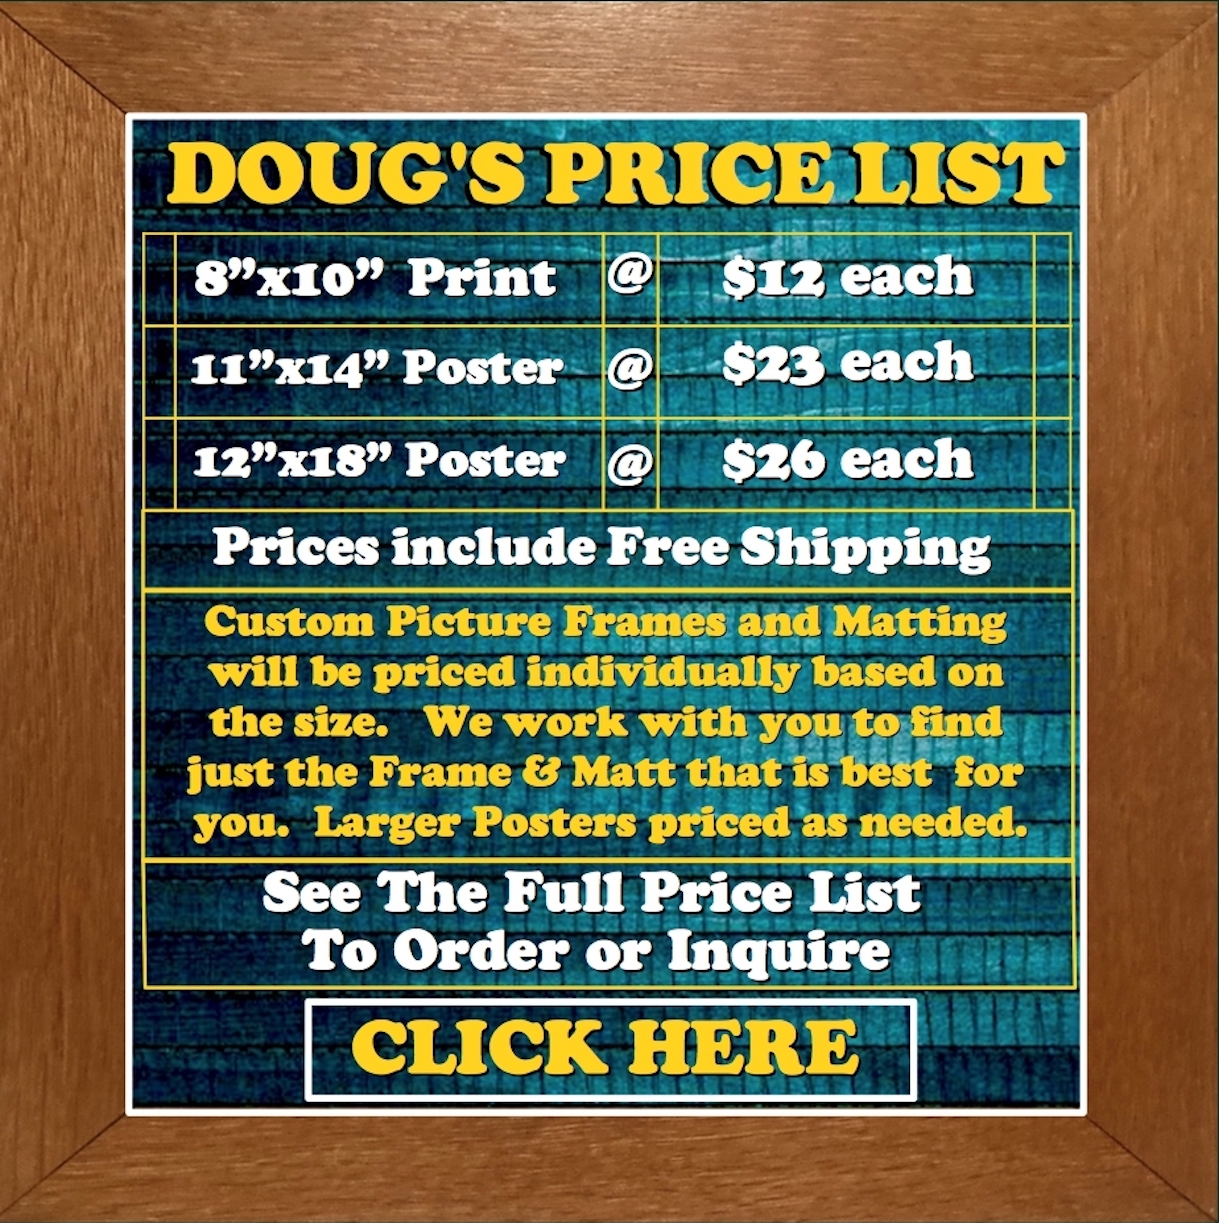 ===============DOUGS PRICE LIST DOUGS PICTURES===============================================================================================================================================DOUGS PRICE LIST DOUGS PICTURES